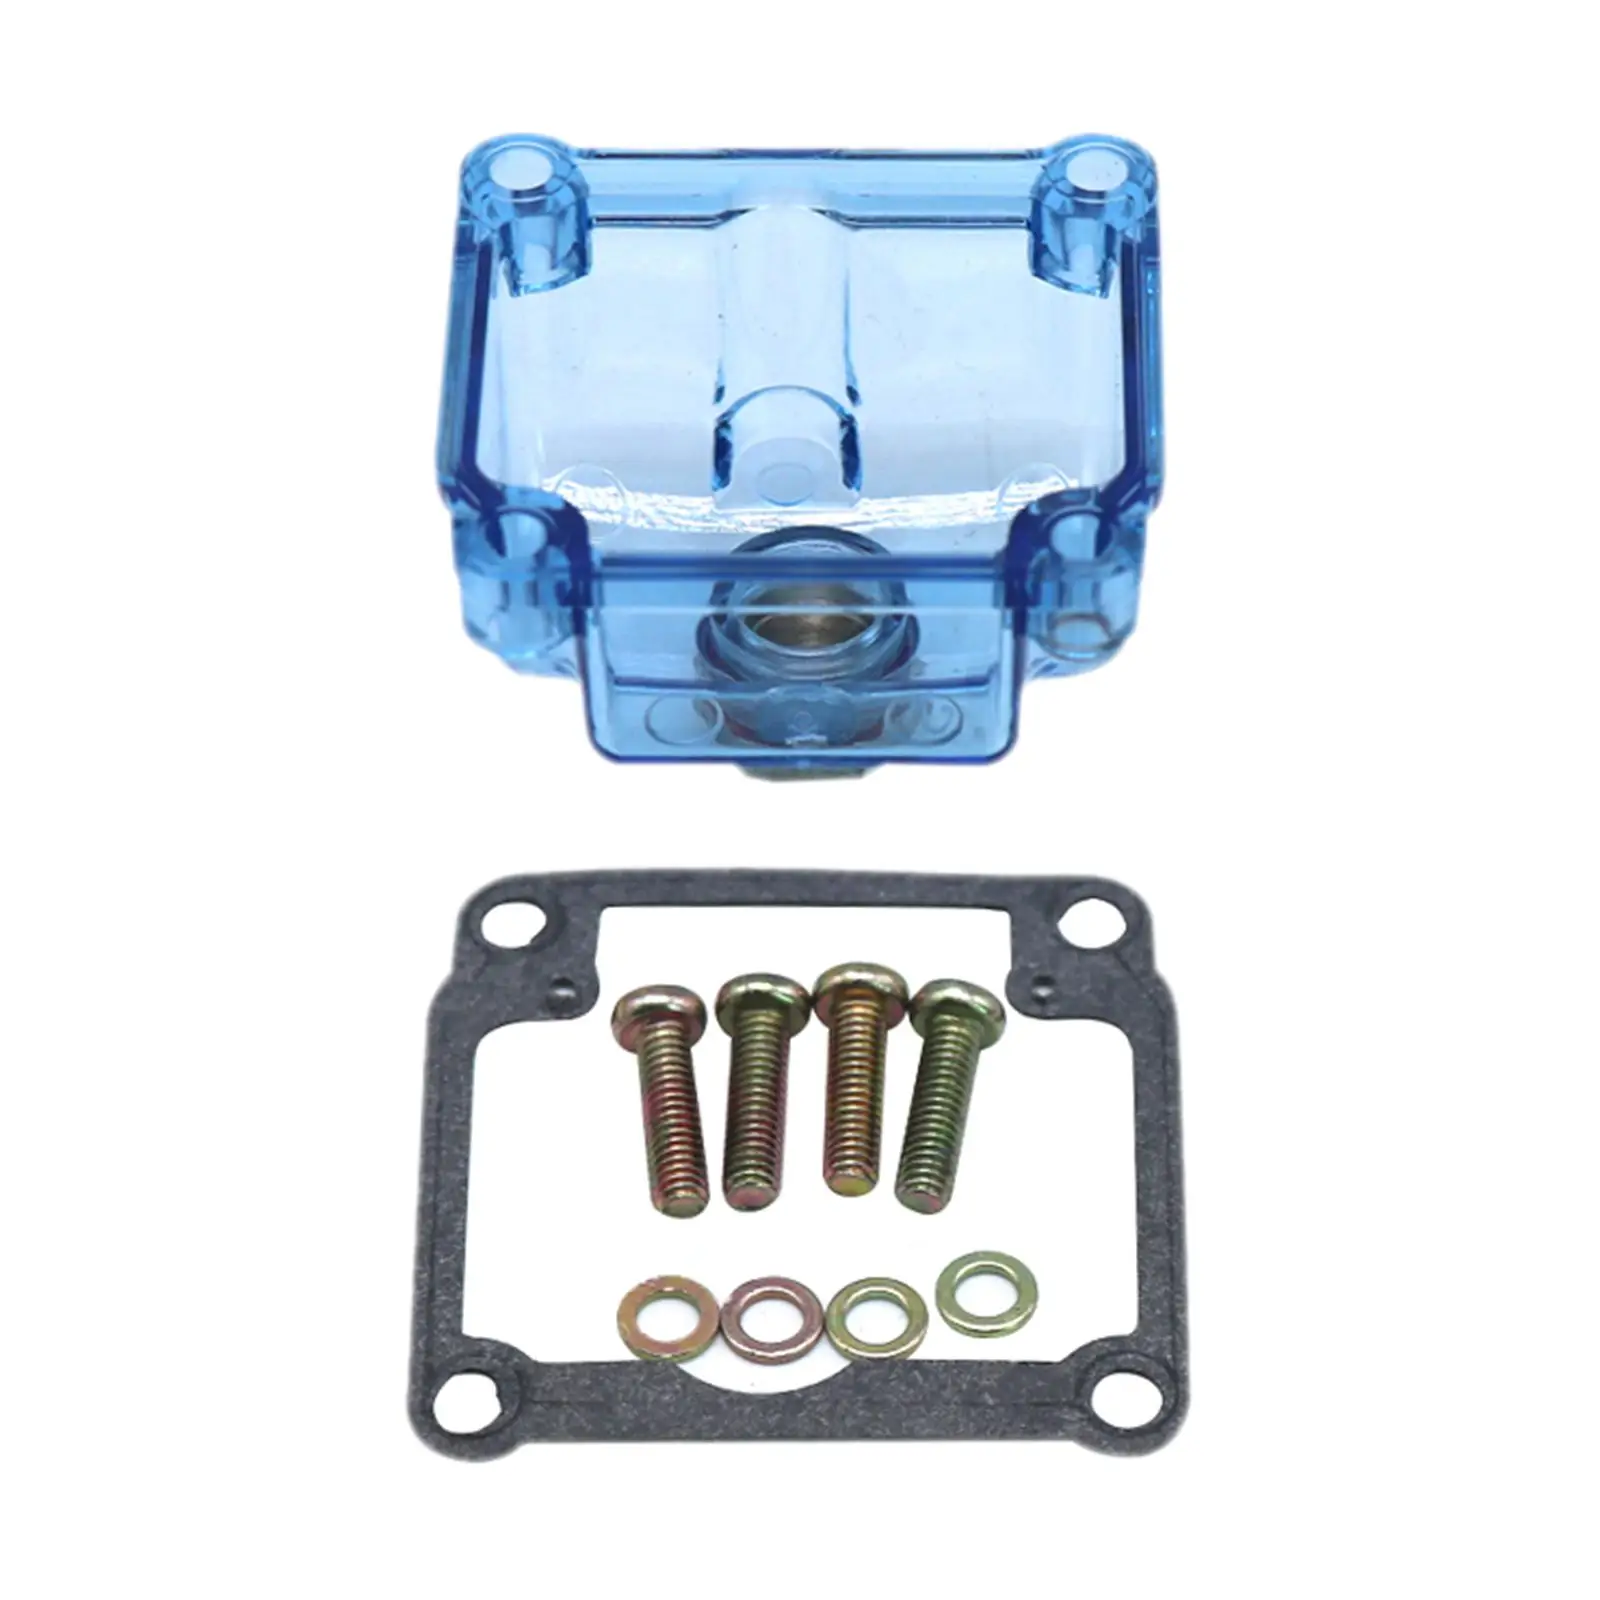 Carburetor Float Bowl Chamber Accessories with Gasket and Mounting Screws Fit for Dellorto Phbg High Performance Durable